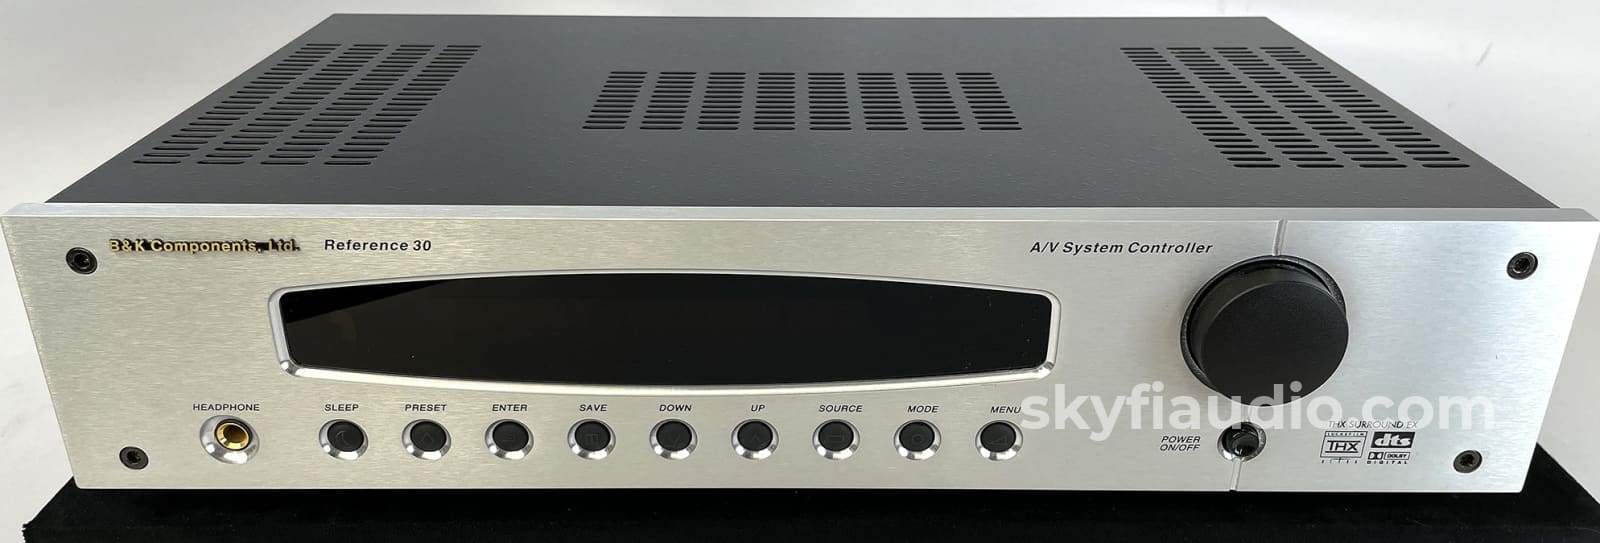 B&K Reference 30 Preamplifier And Surround Sound Processor